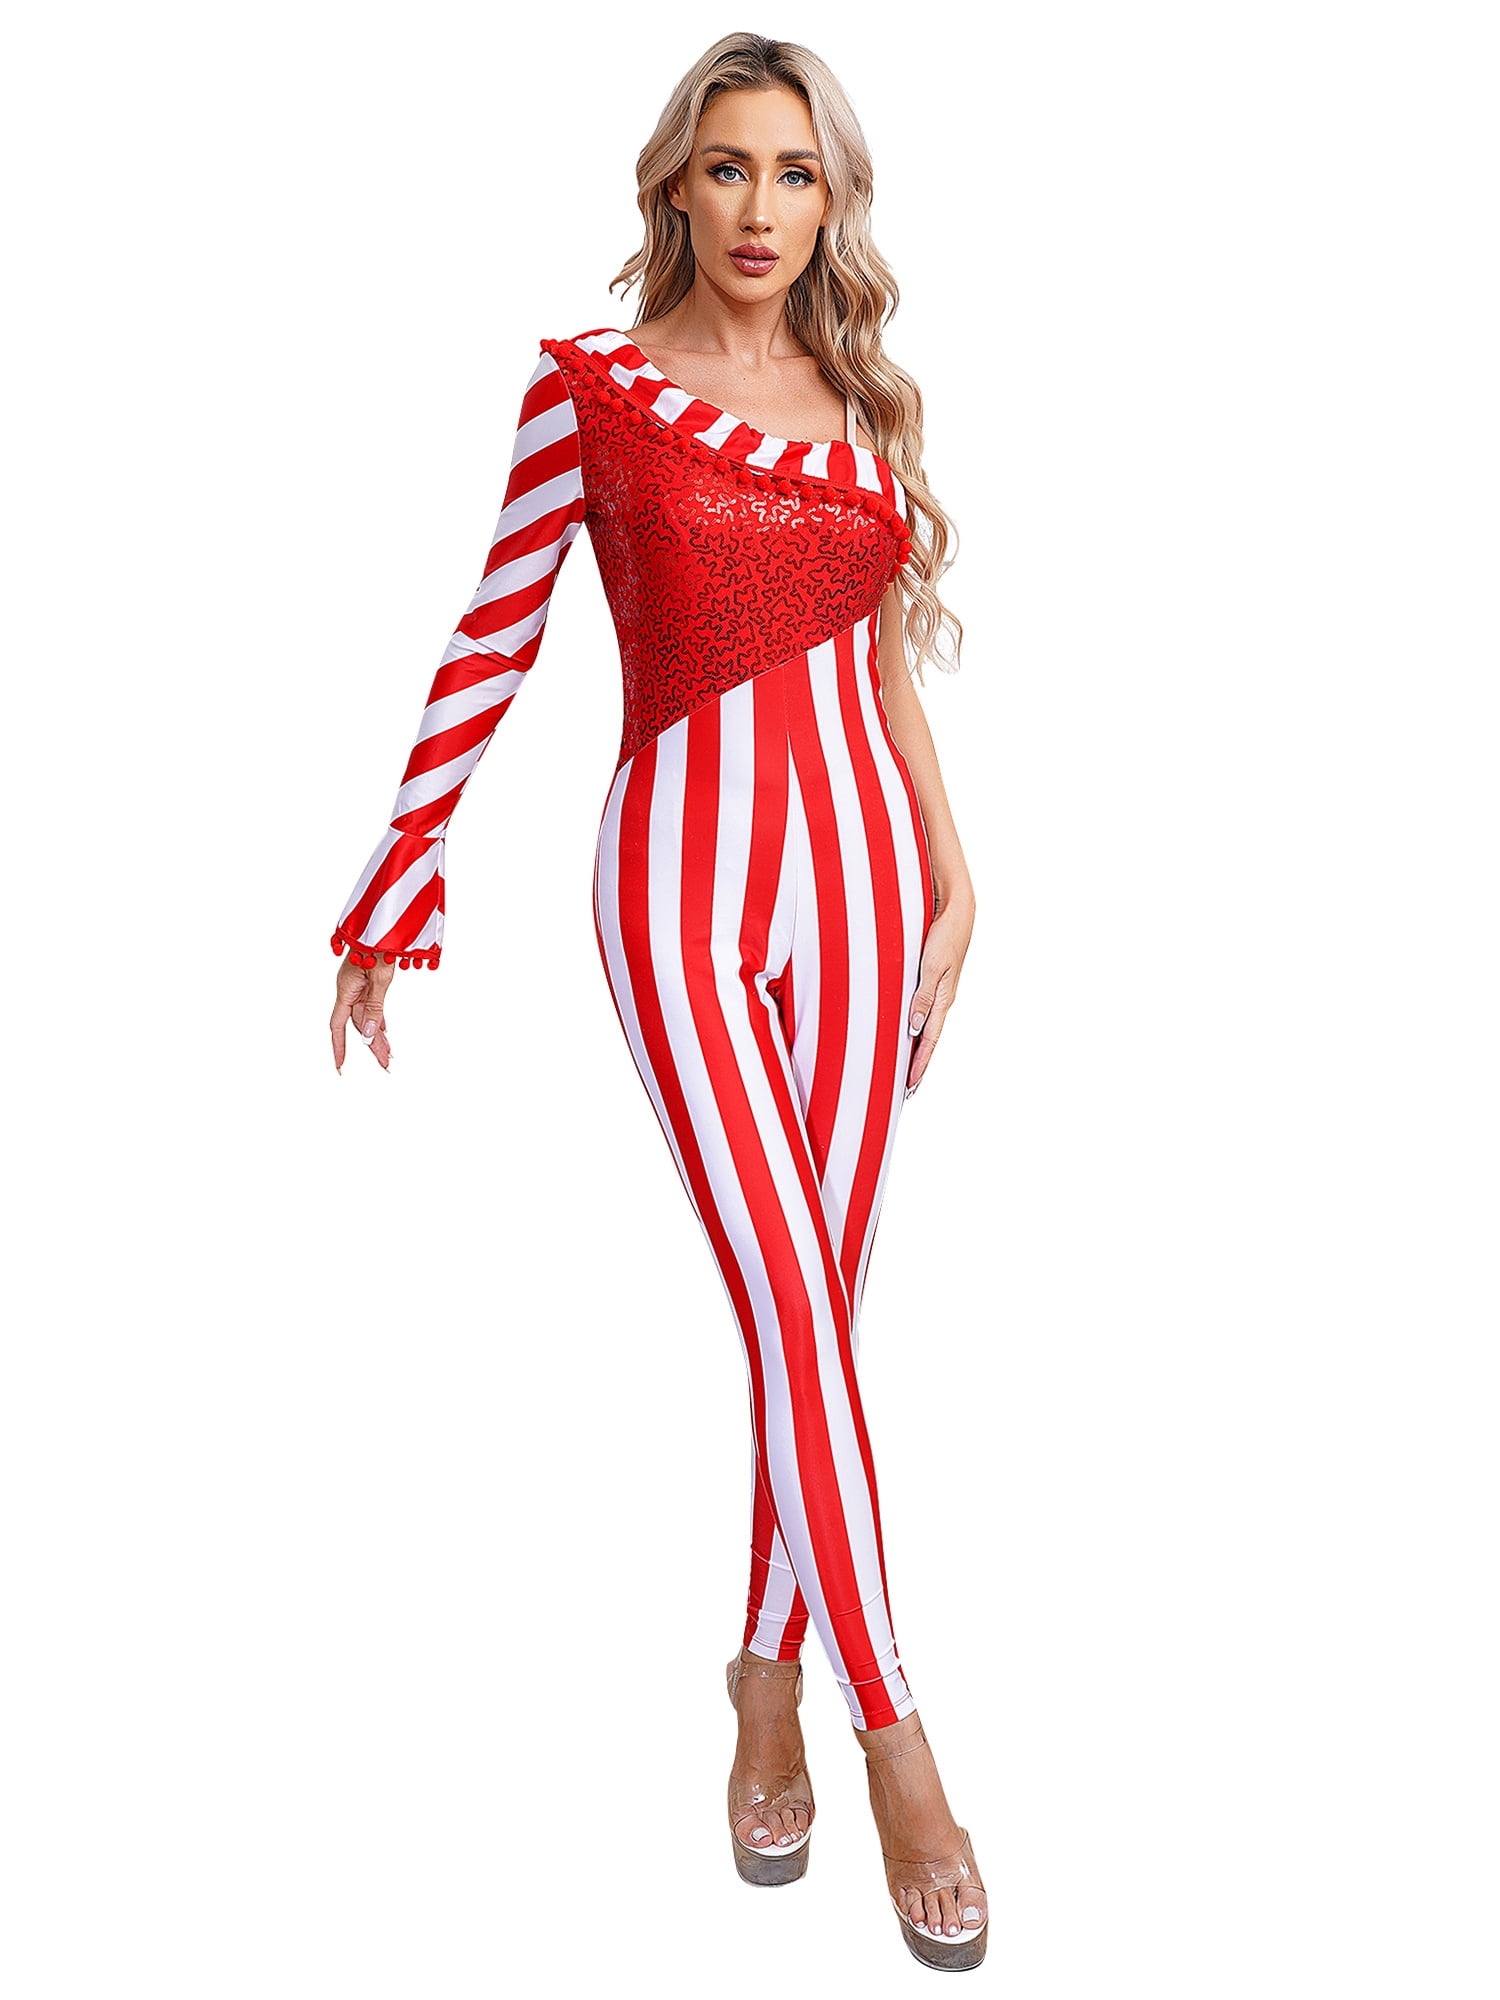 Sweet Delight Candy Cane Costume